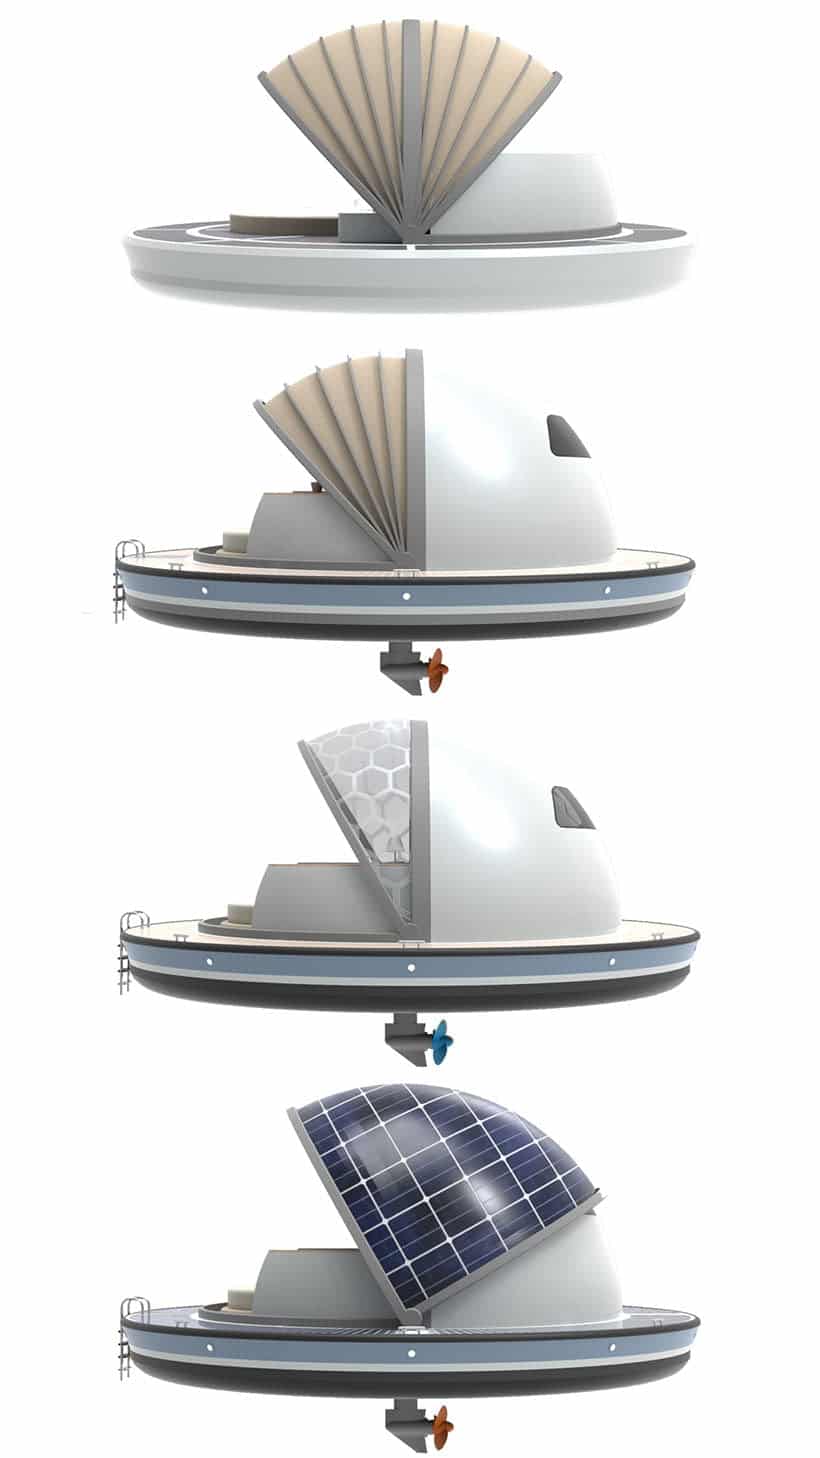 pearlsuites mobile floating suite concept by pierpaolo lazzarini12